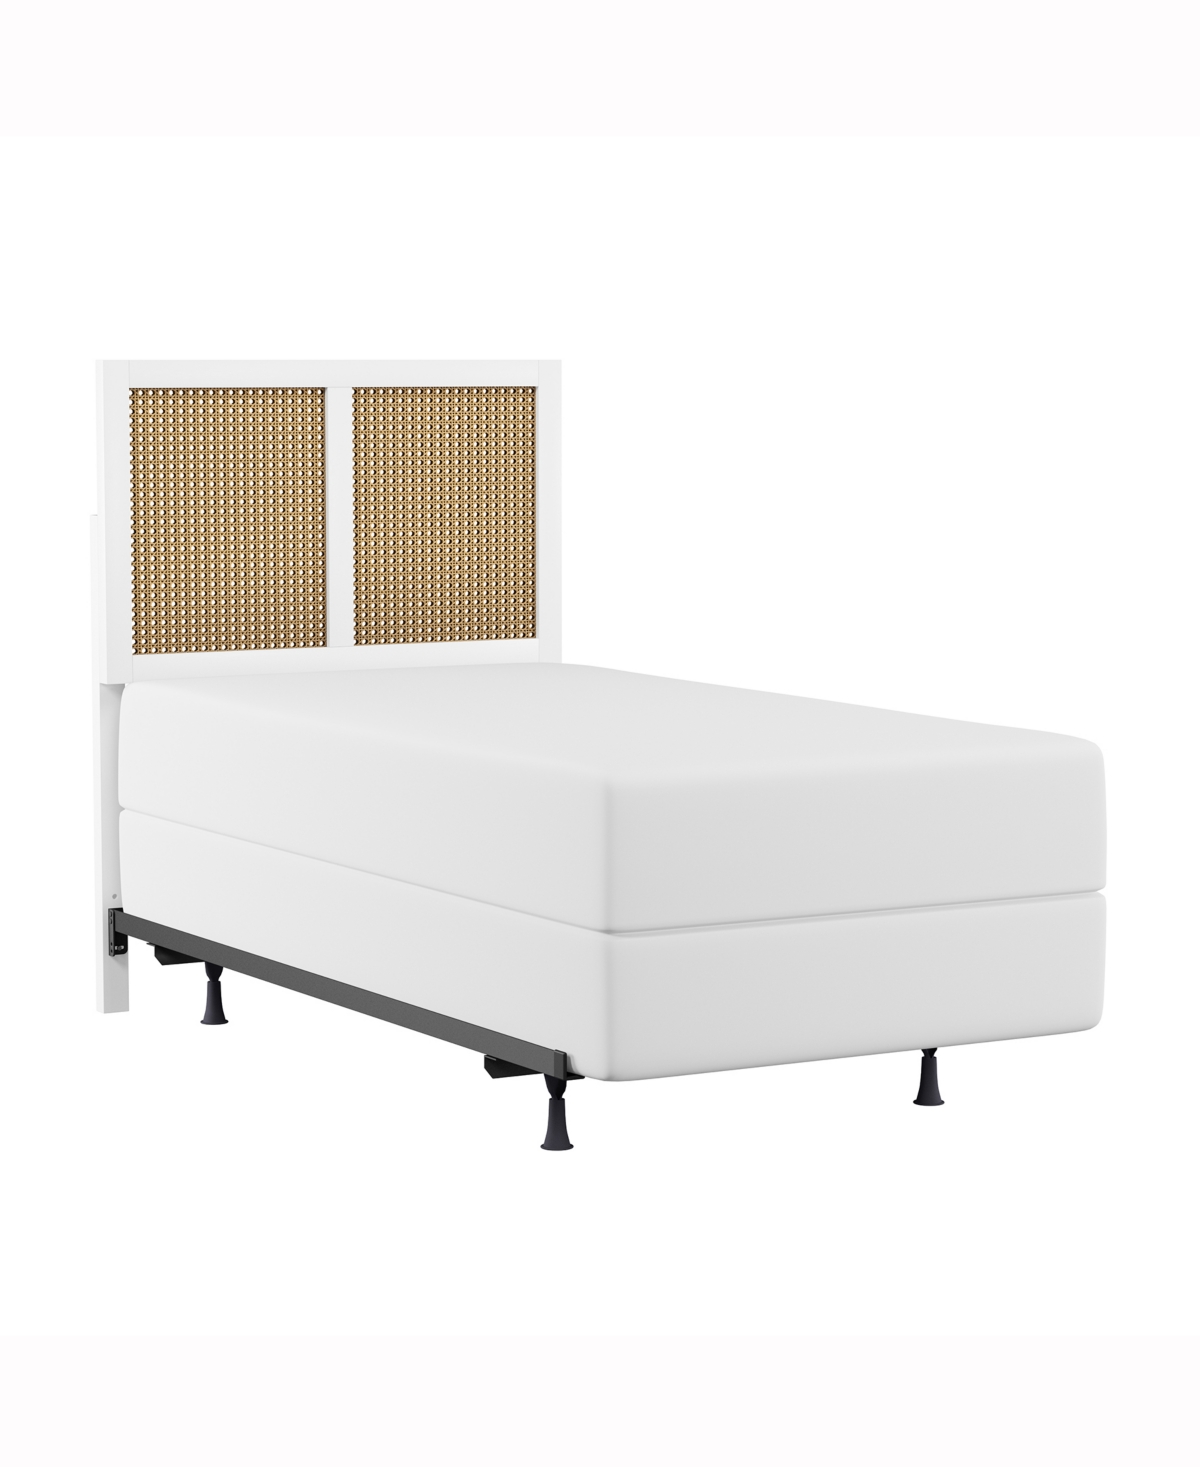 Hillsdale 50" Wood And Cane Panel Serena Furniture Twin Headboard With Frame In White